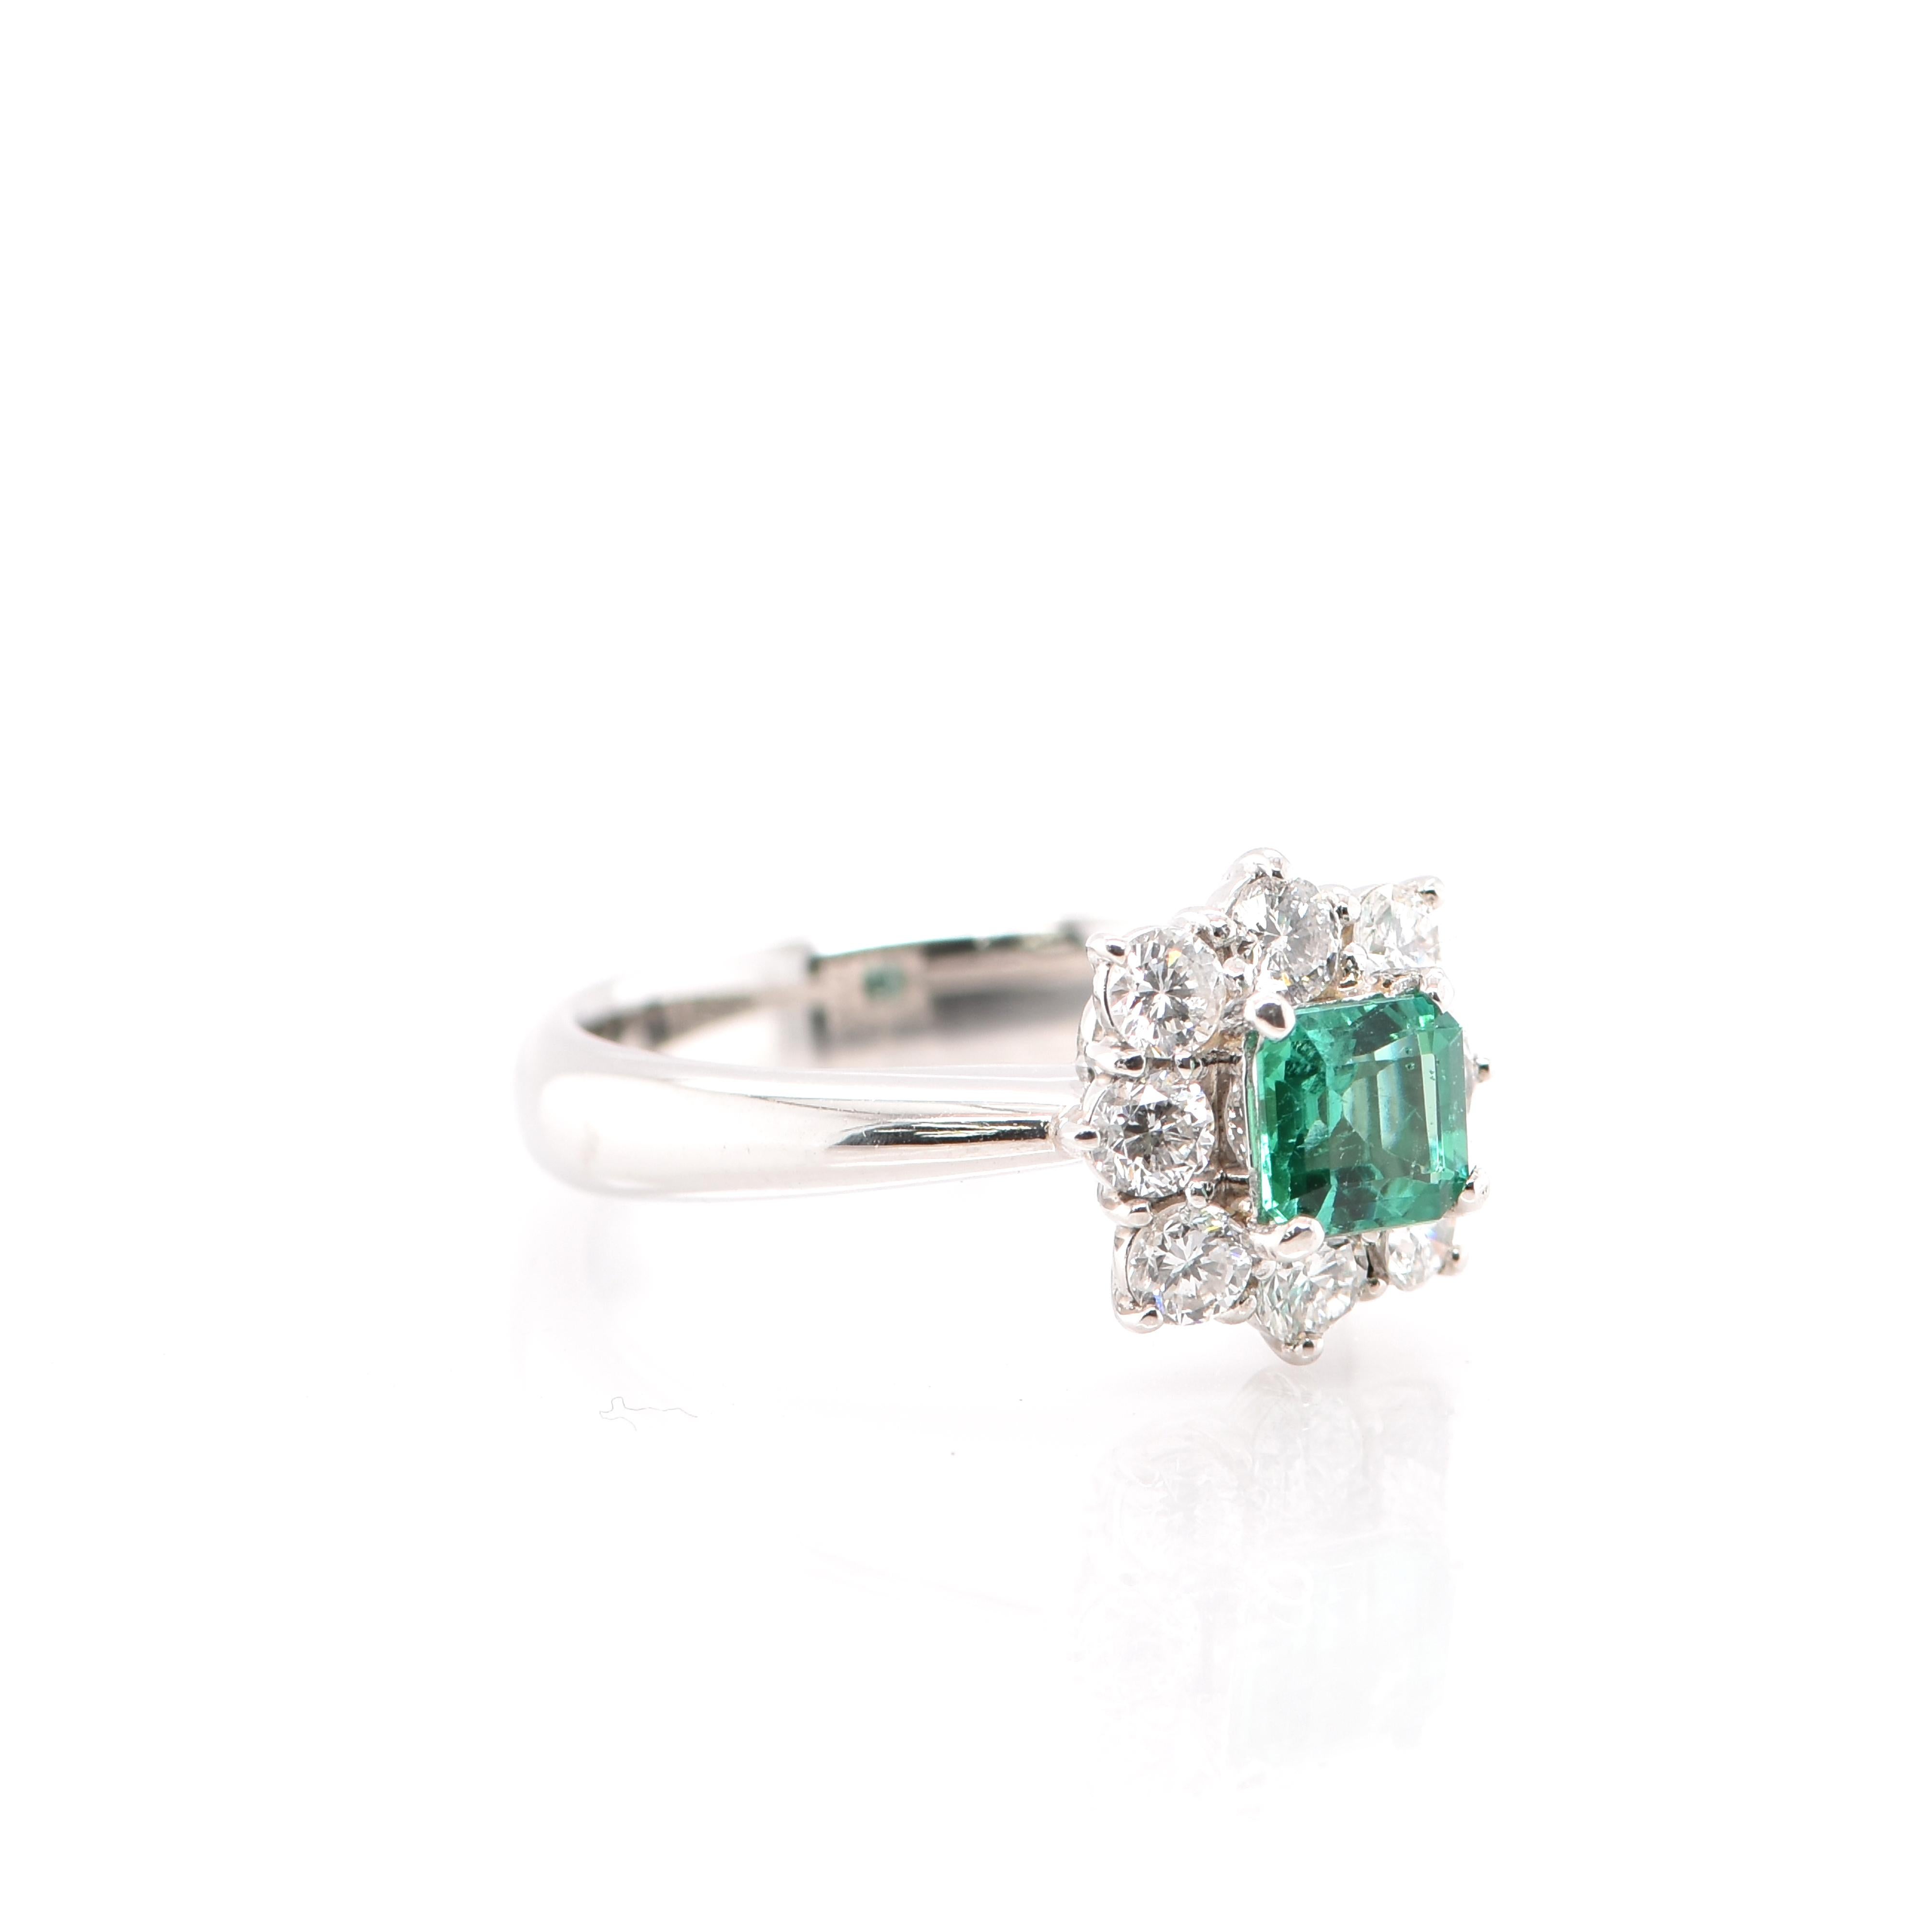 Emerald Cut GIA 0.61 Carat No Oil Colombian Emerald and Diamond Ring Set in Platinum